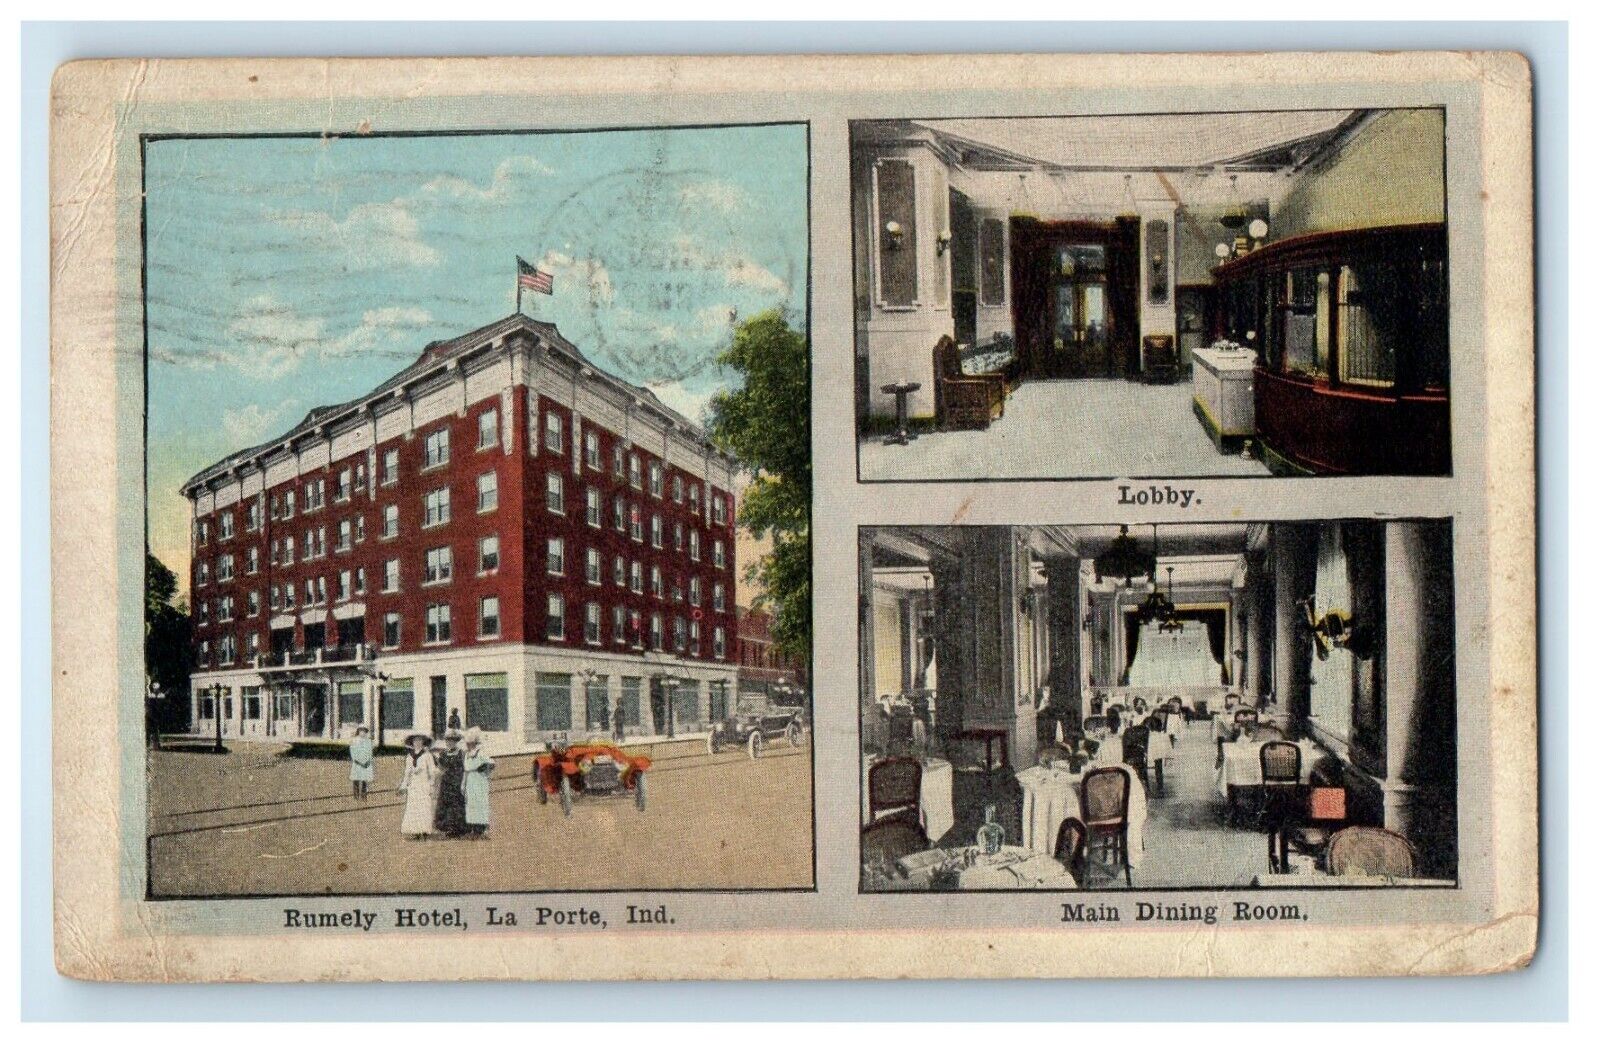 1920 Rumely Hotel Lobby And Dining Room La Porte Indiana IN Antique Postcard